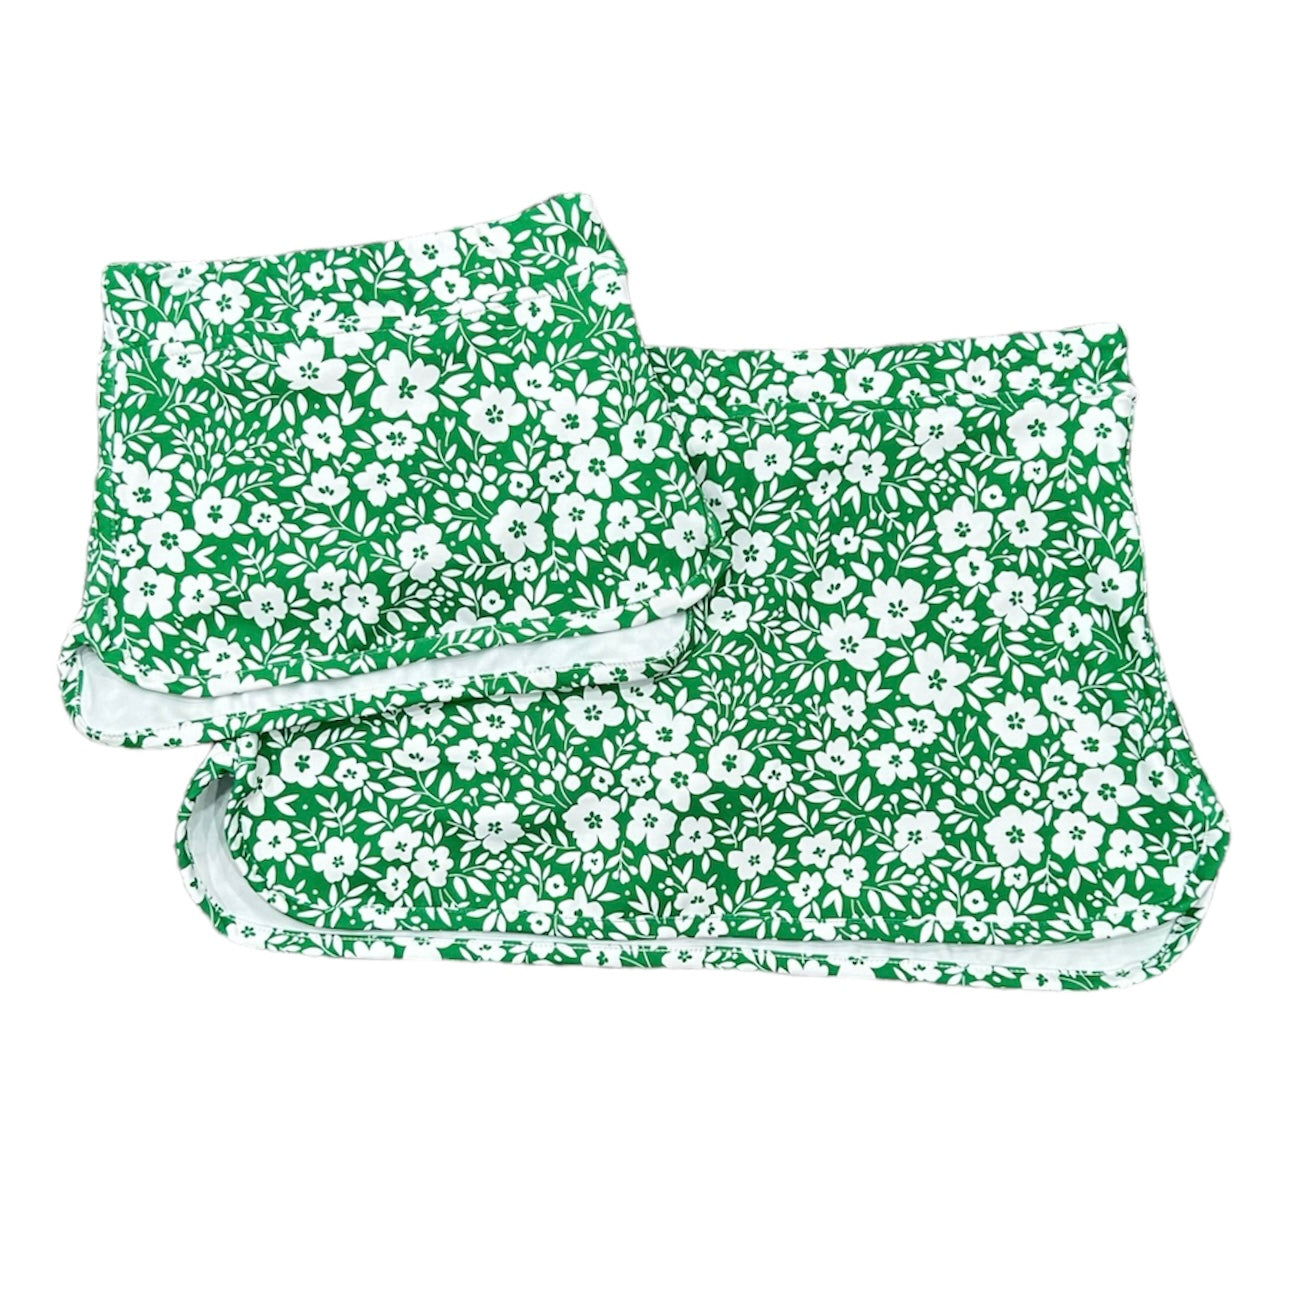 Straight Tennis Skirt - Emerald Ditzy Floral